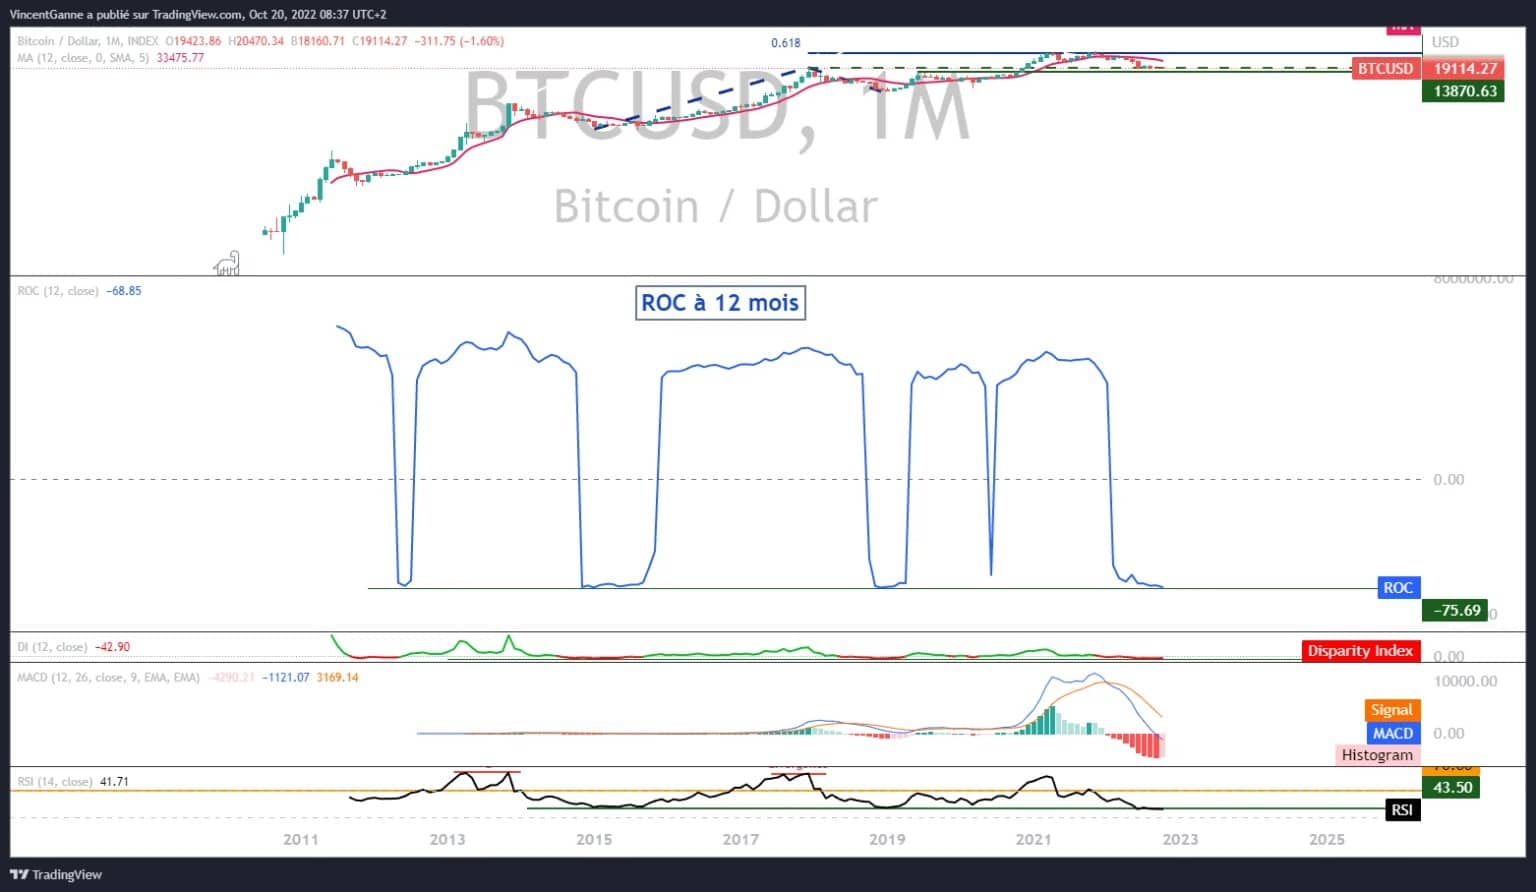 Chart that exposes the relative 12 month momentum of BTC (12 month ROC)